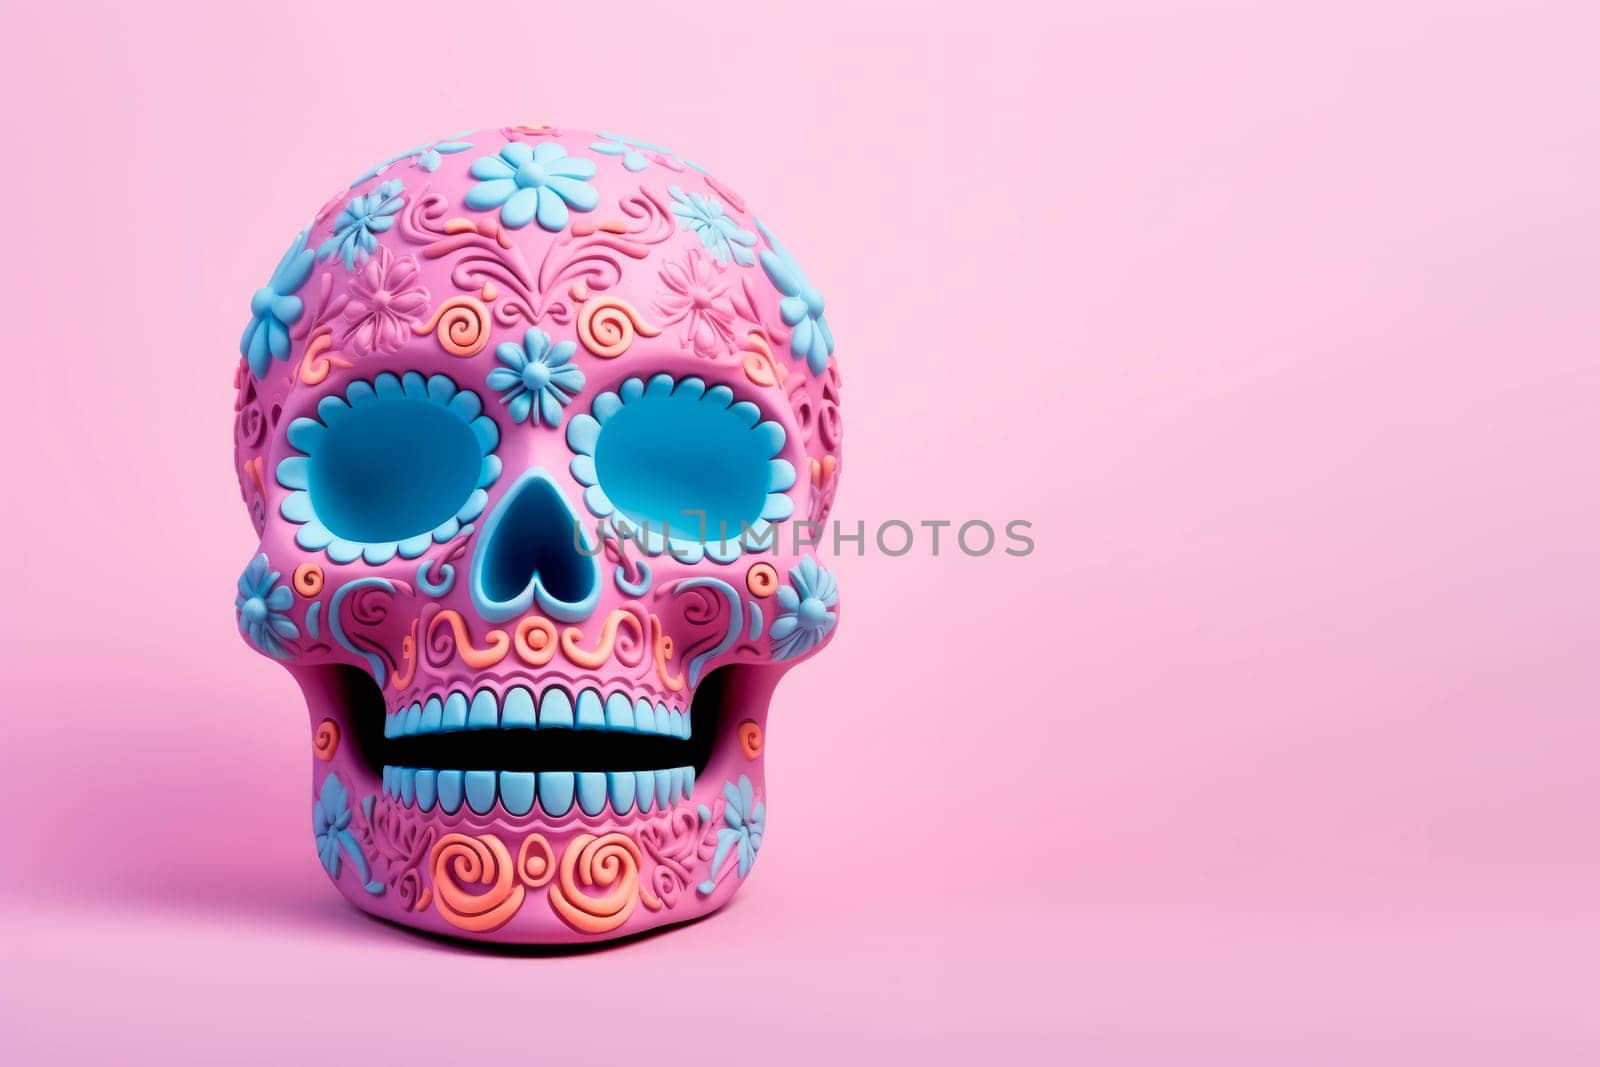 Bright creative skull sugar loaf is made in Mexican traditions. by Spirina